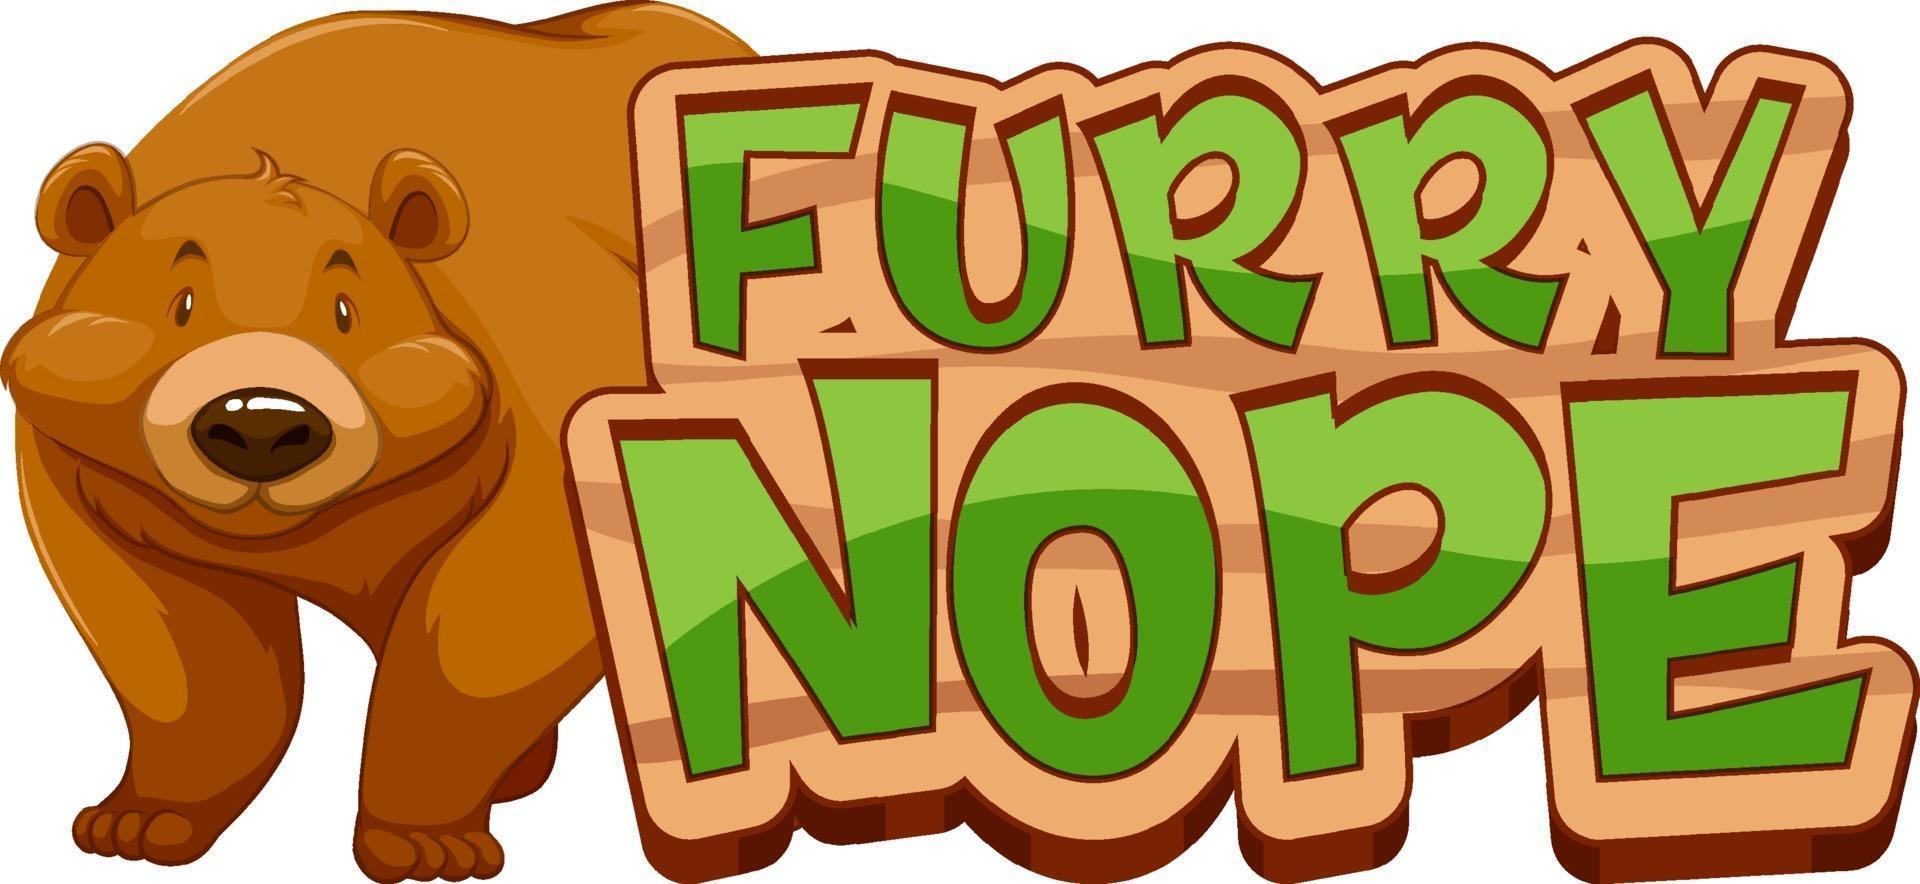 Furry Nope font banner with grizzly bear cartoon character isolated vector